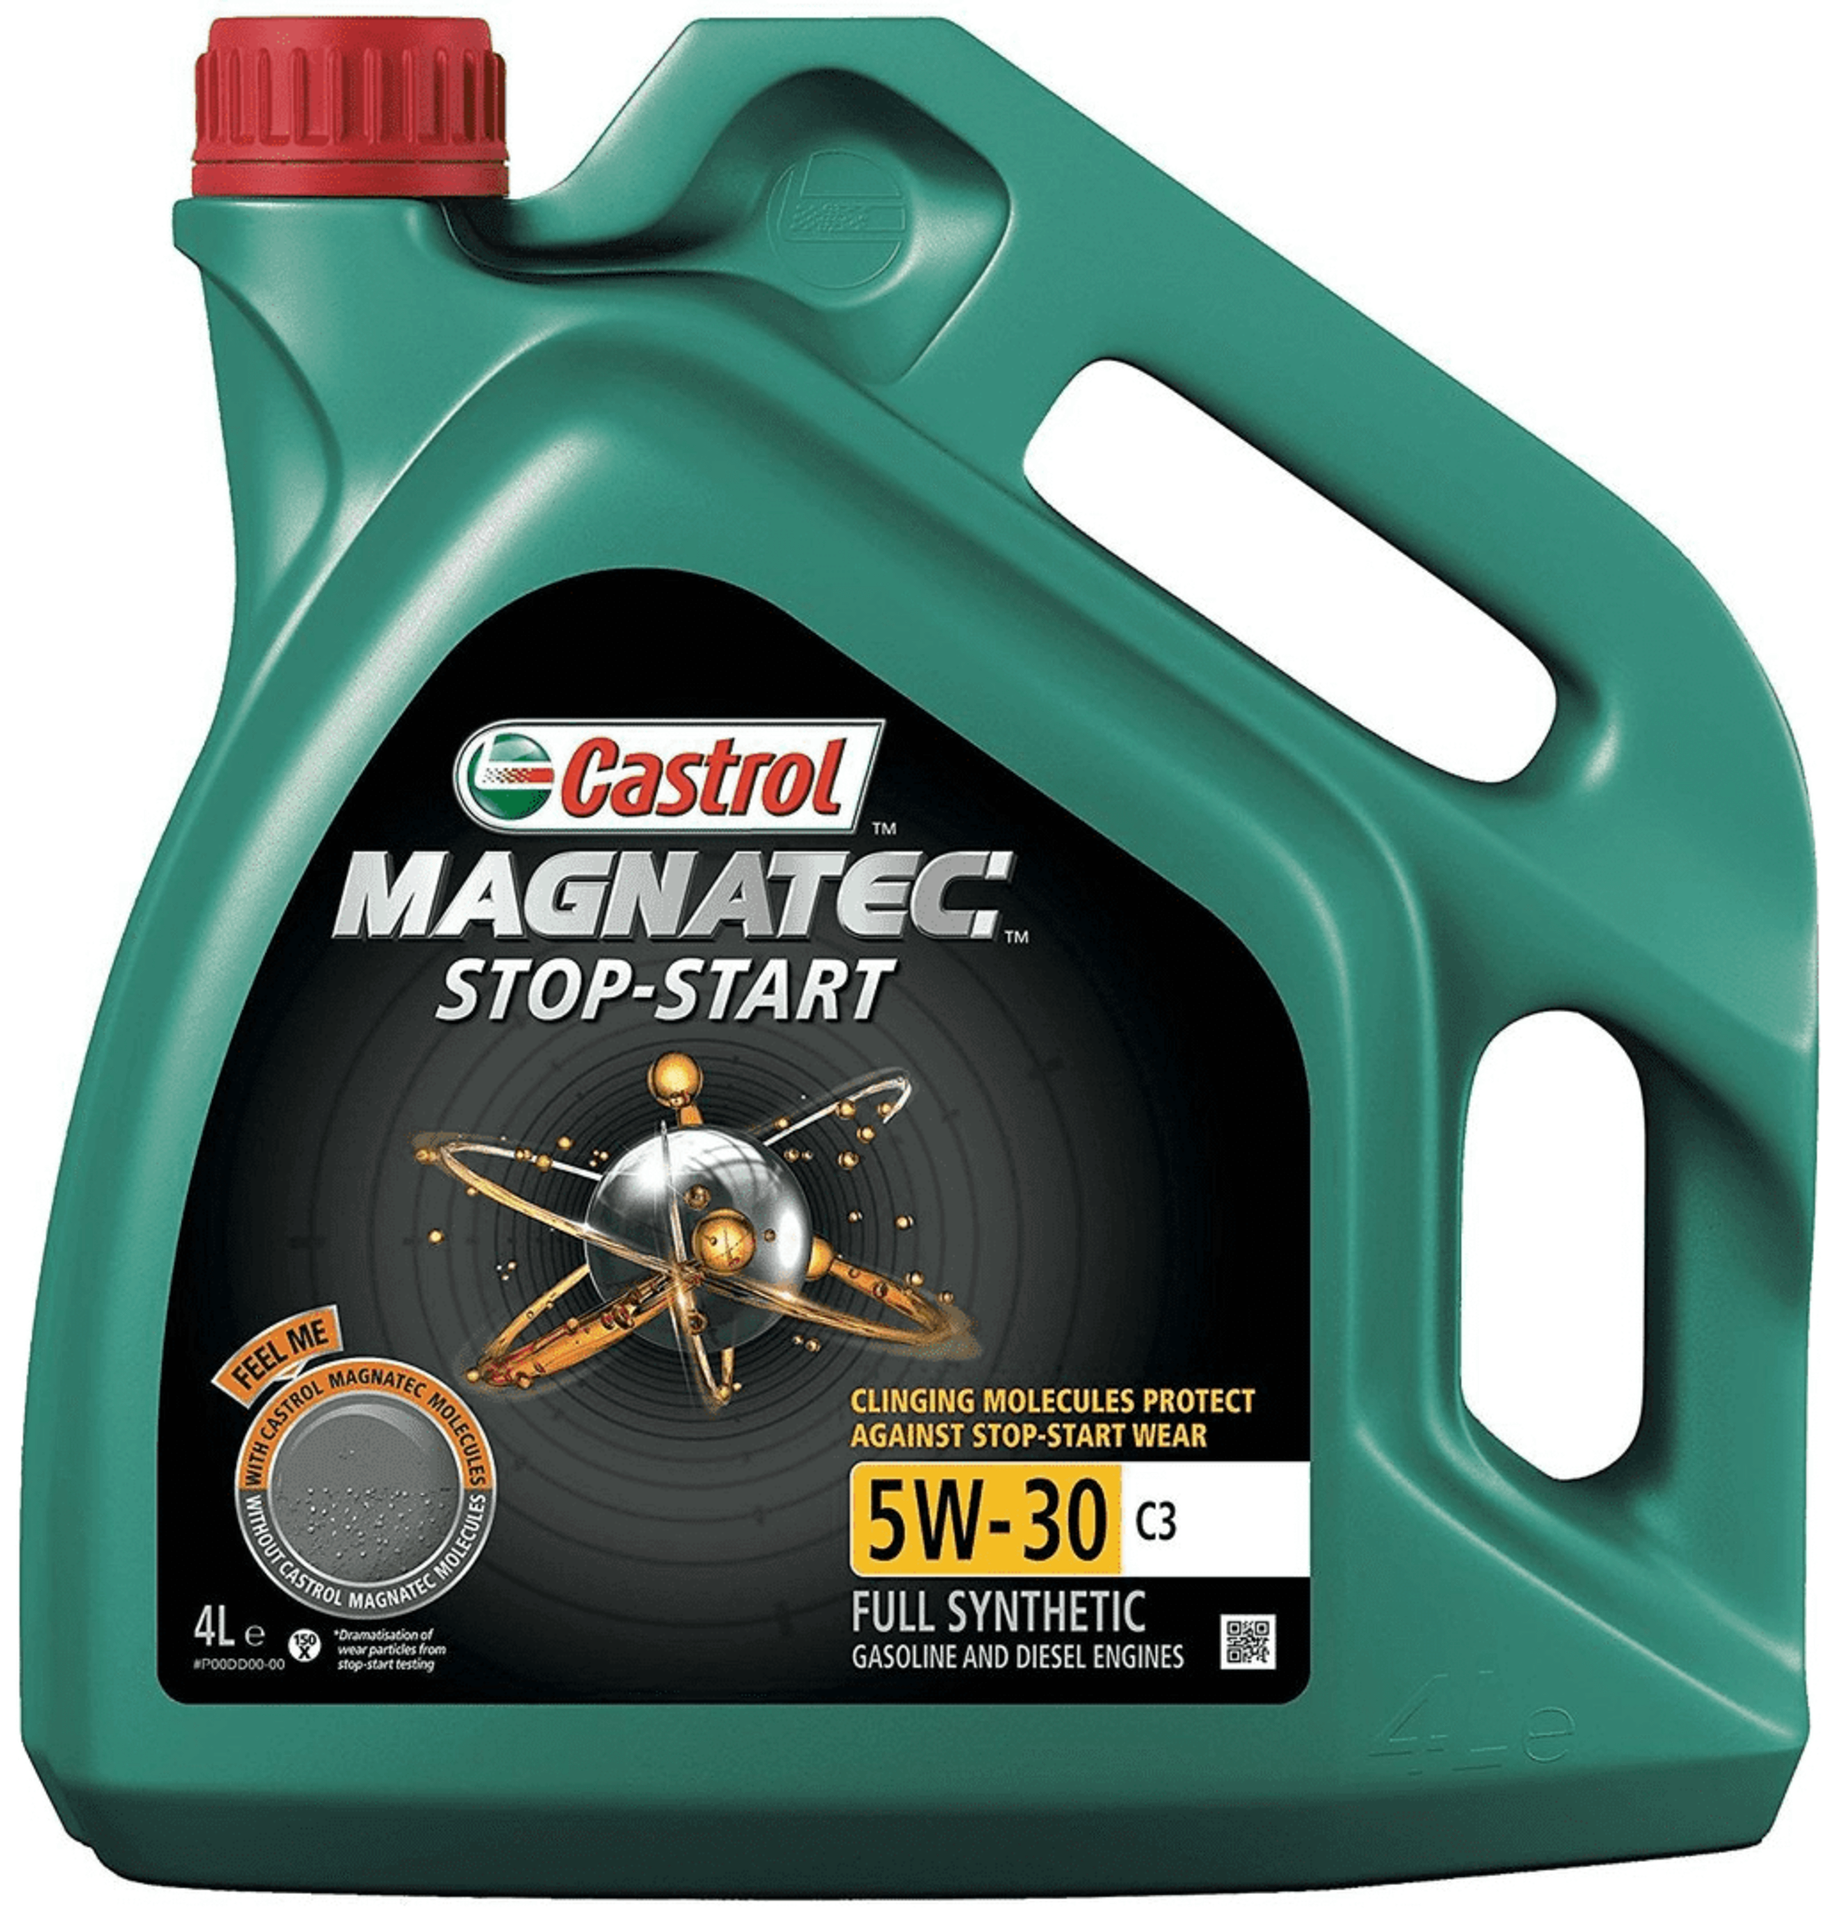 8 X BRAND NEW CASTROL MAGNATEC STOP START FULLY SYNTHETIC 5W-30 4 LITRE R10